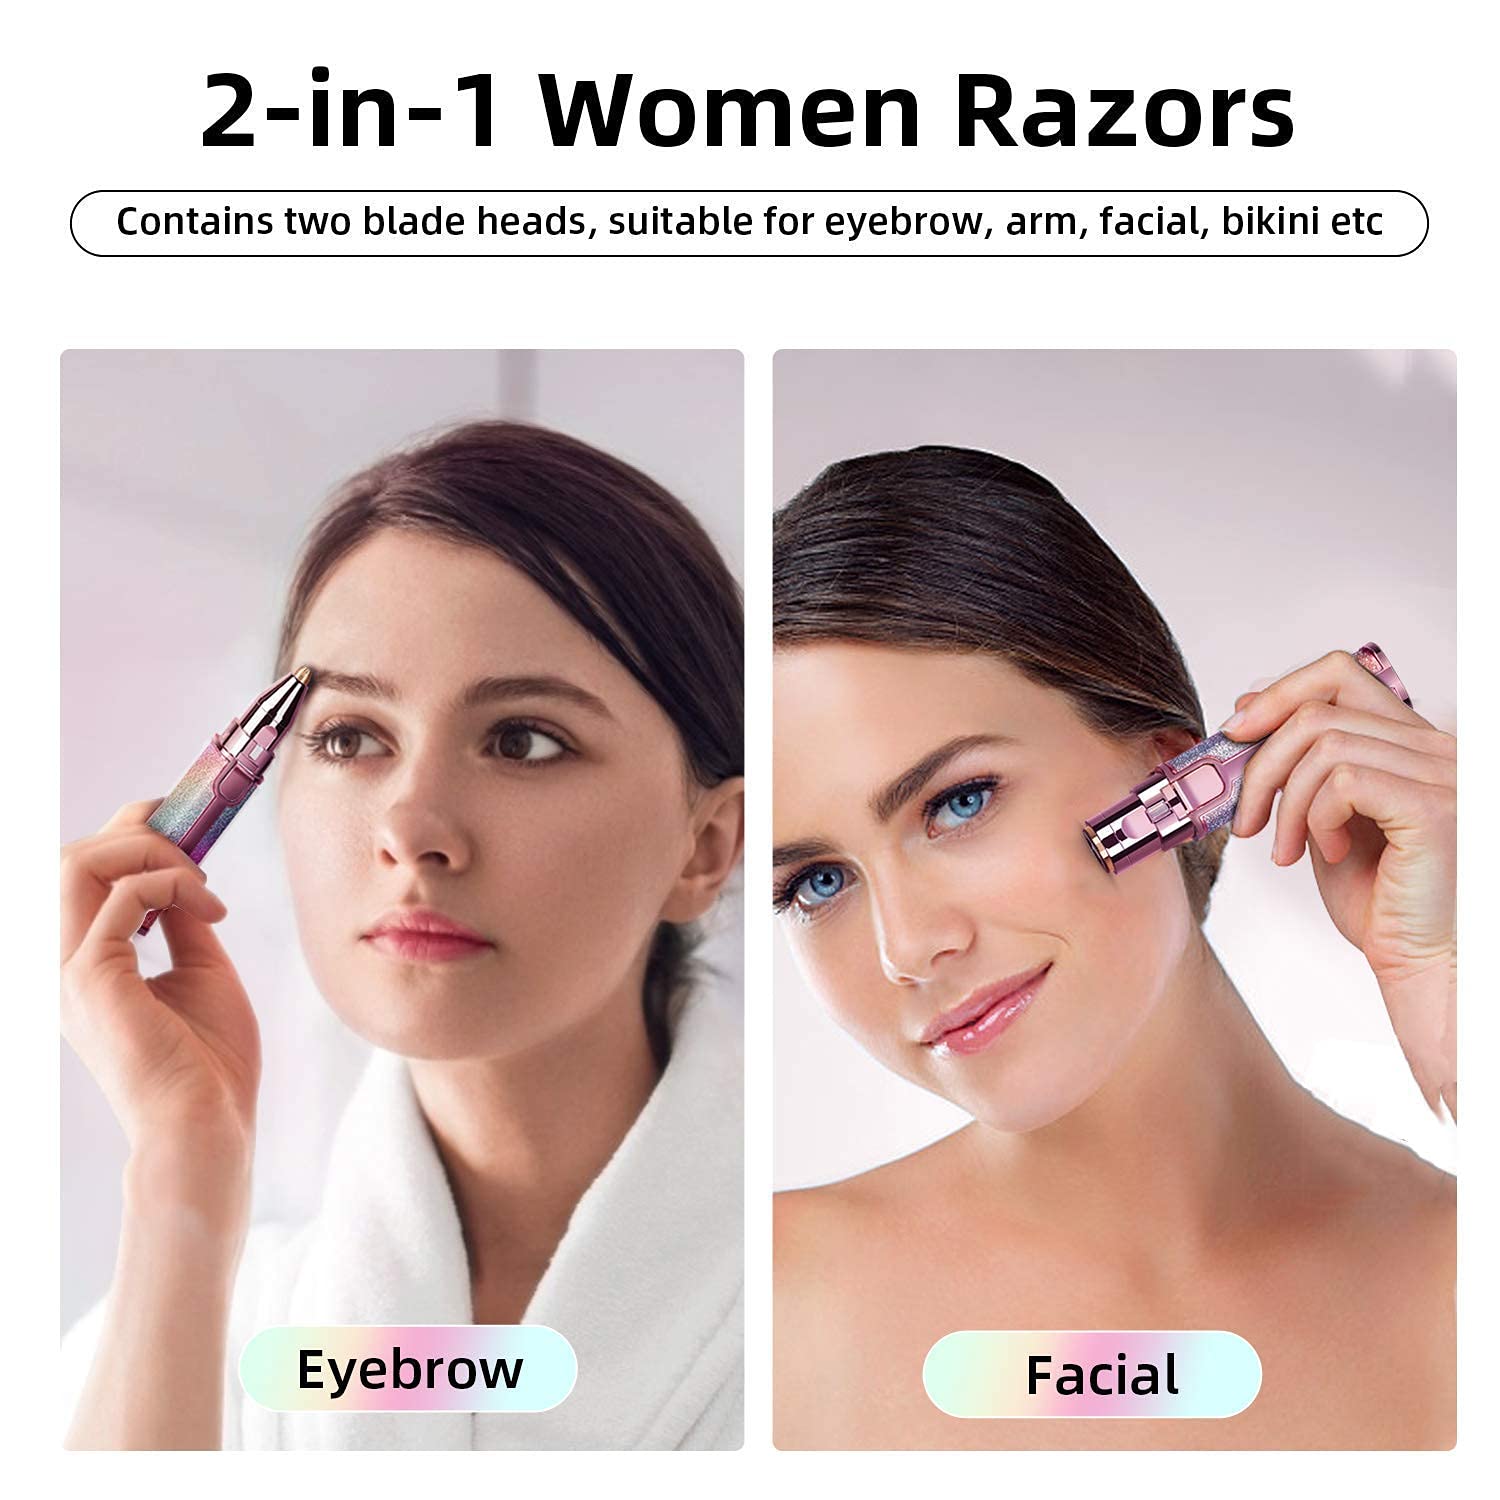 2 In 1 Electric Rechargeable Eyebrow Trimmer